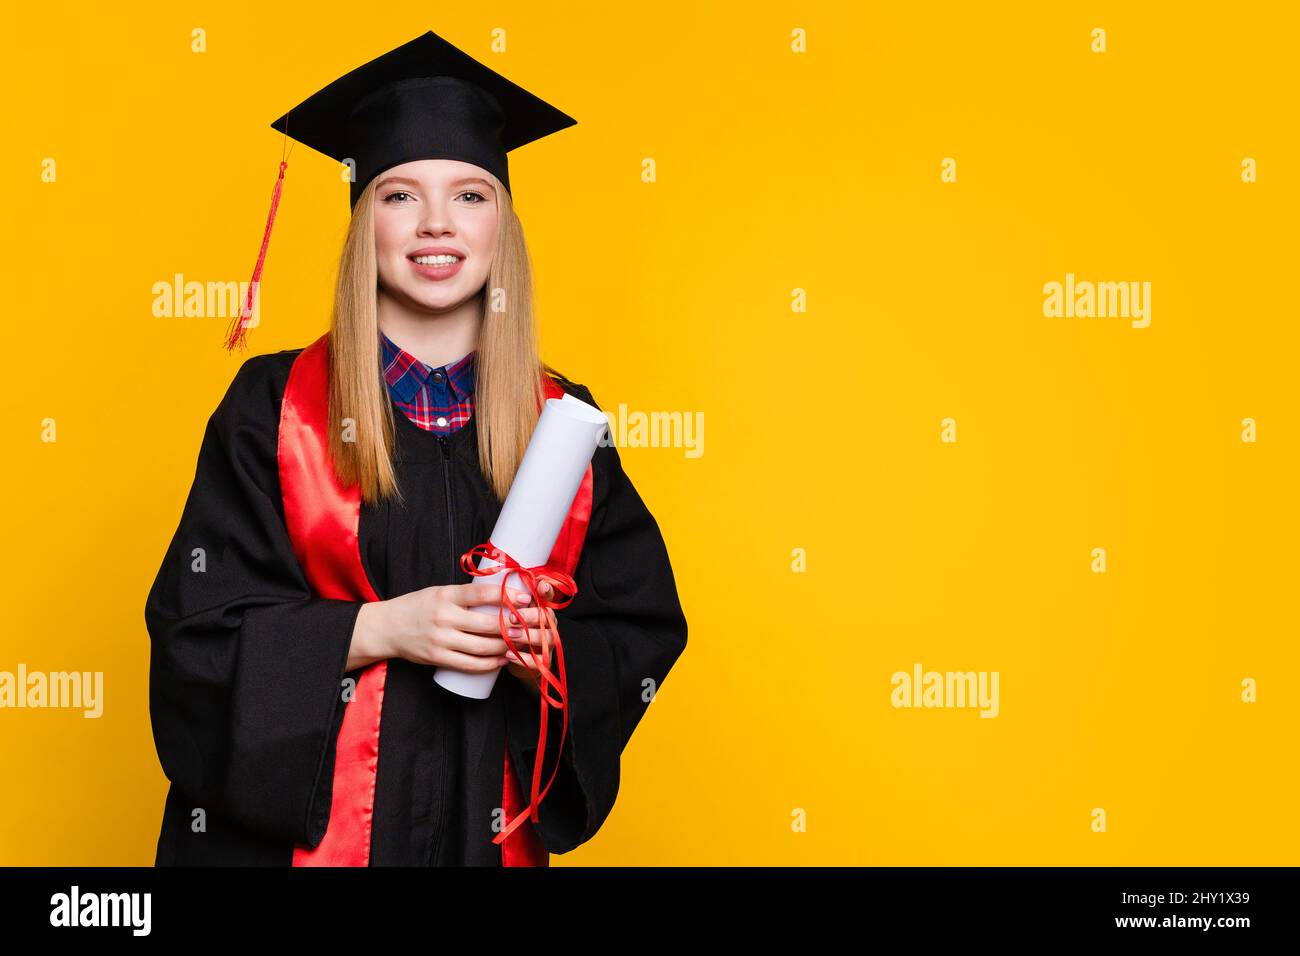 Portrait girl graduate with graduation hat and diploma on yellow background. Blonde young woman wearing graduation cap and ceremony robe holding Certificate tied with red ribbon. Education Concept Stock Photo